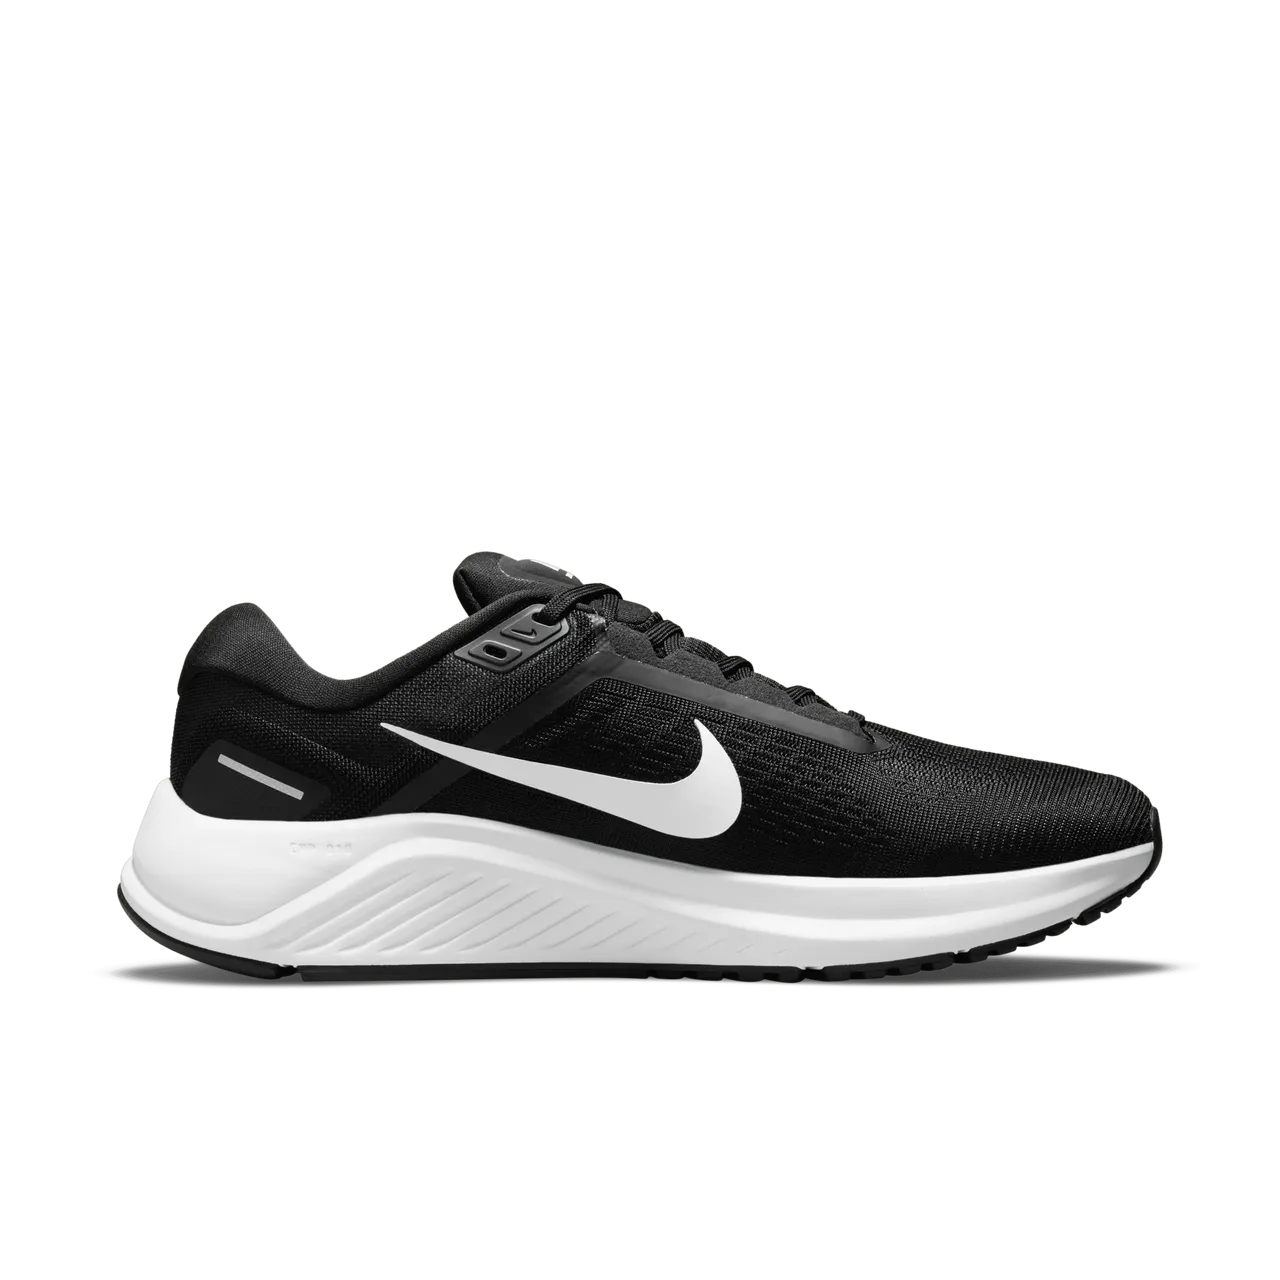 Nike Structure 24 Men's Road Running Shoes - Black